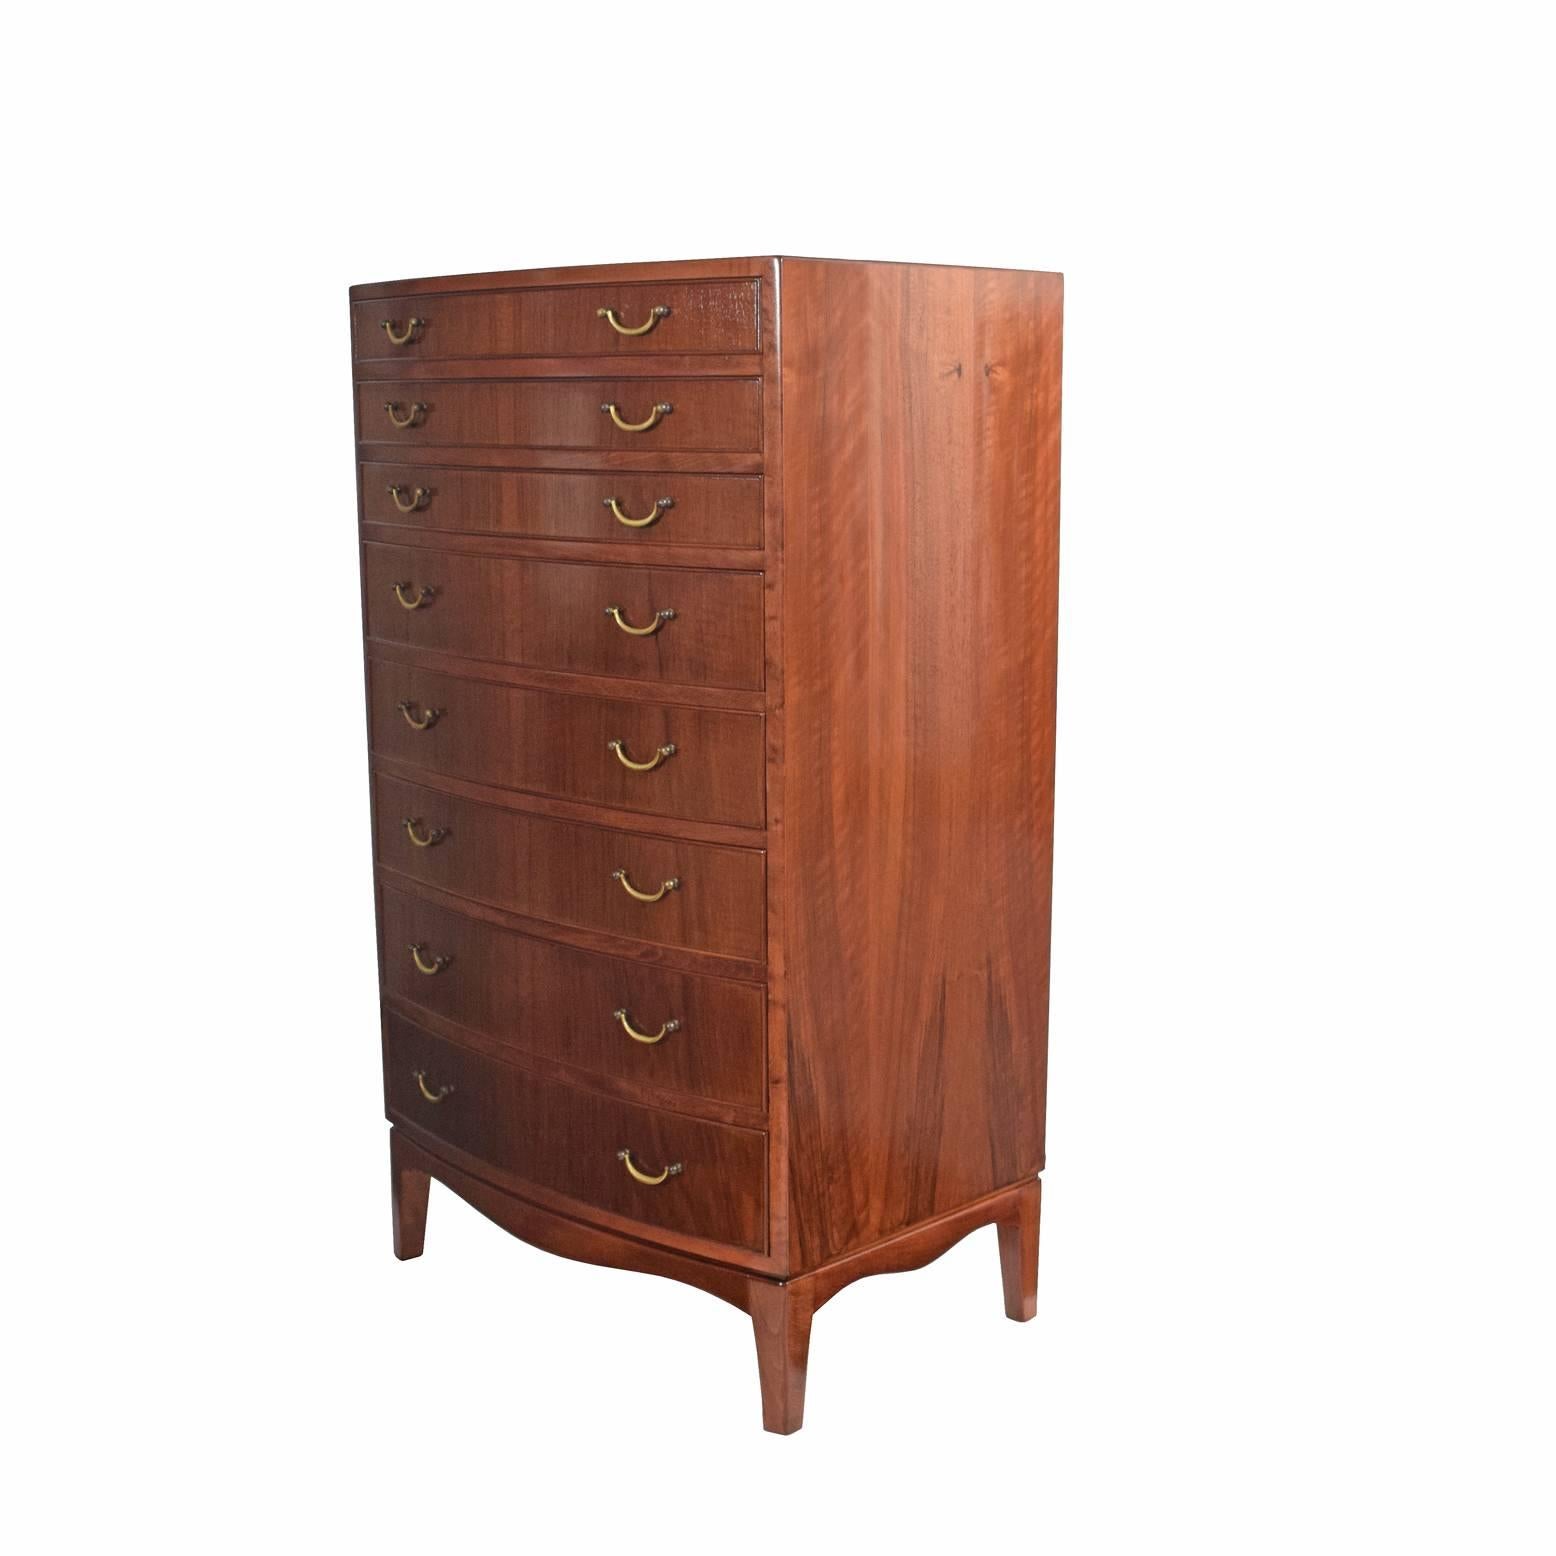 Tall chest of drawers with eight walnut drawers, brass pulls and curved front on each drawer with profile edge.